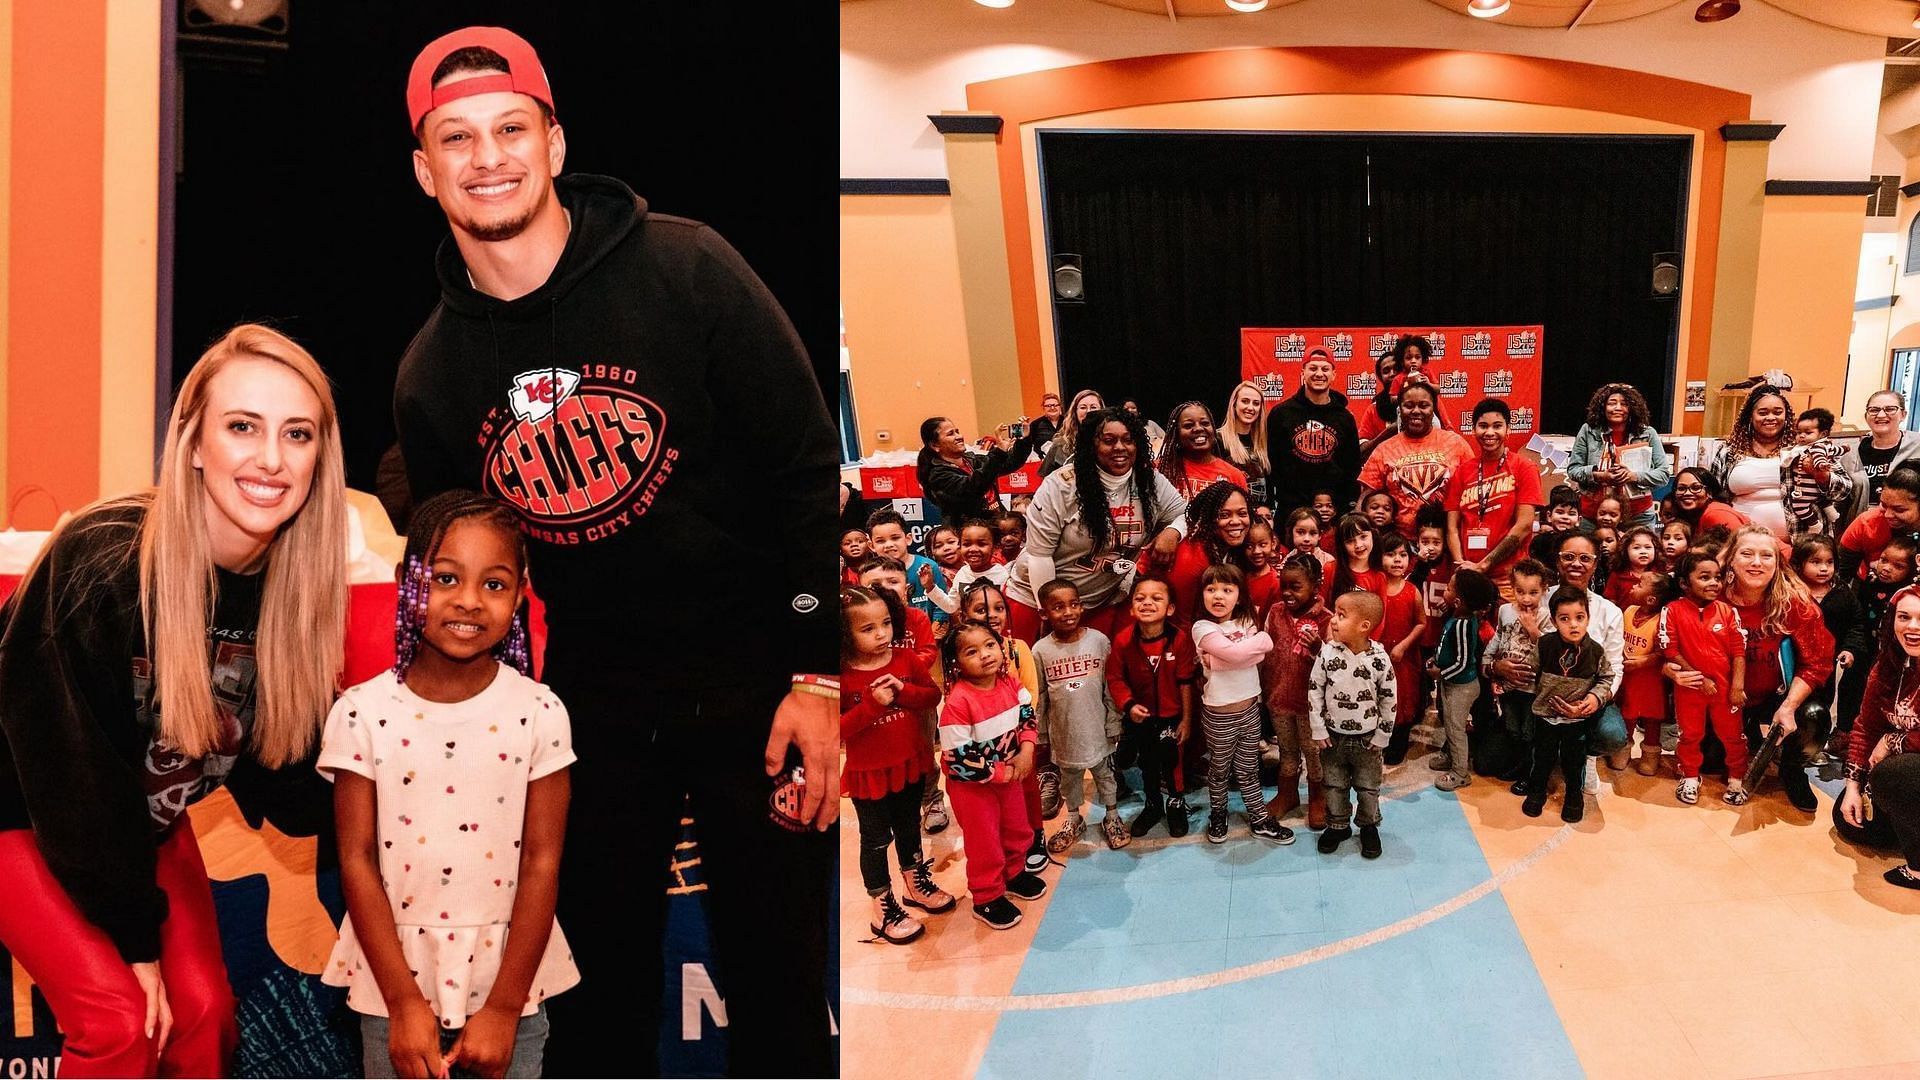 Patrick and Brittany Mahomes donated clothes and supplies in cooperation with Early Start KC. (Image credit: @15andmahomies on Instagram)